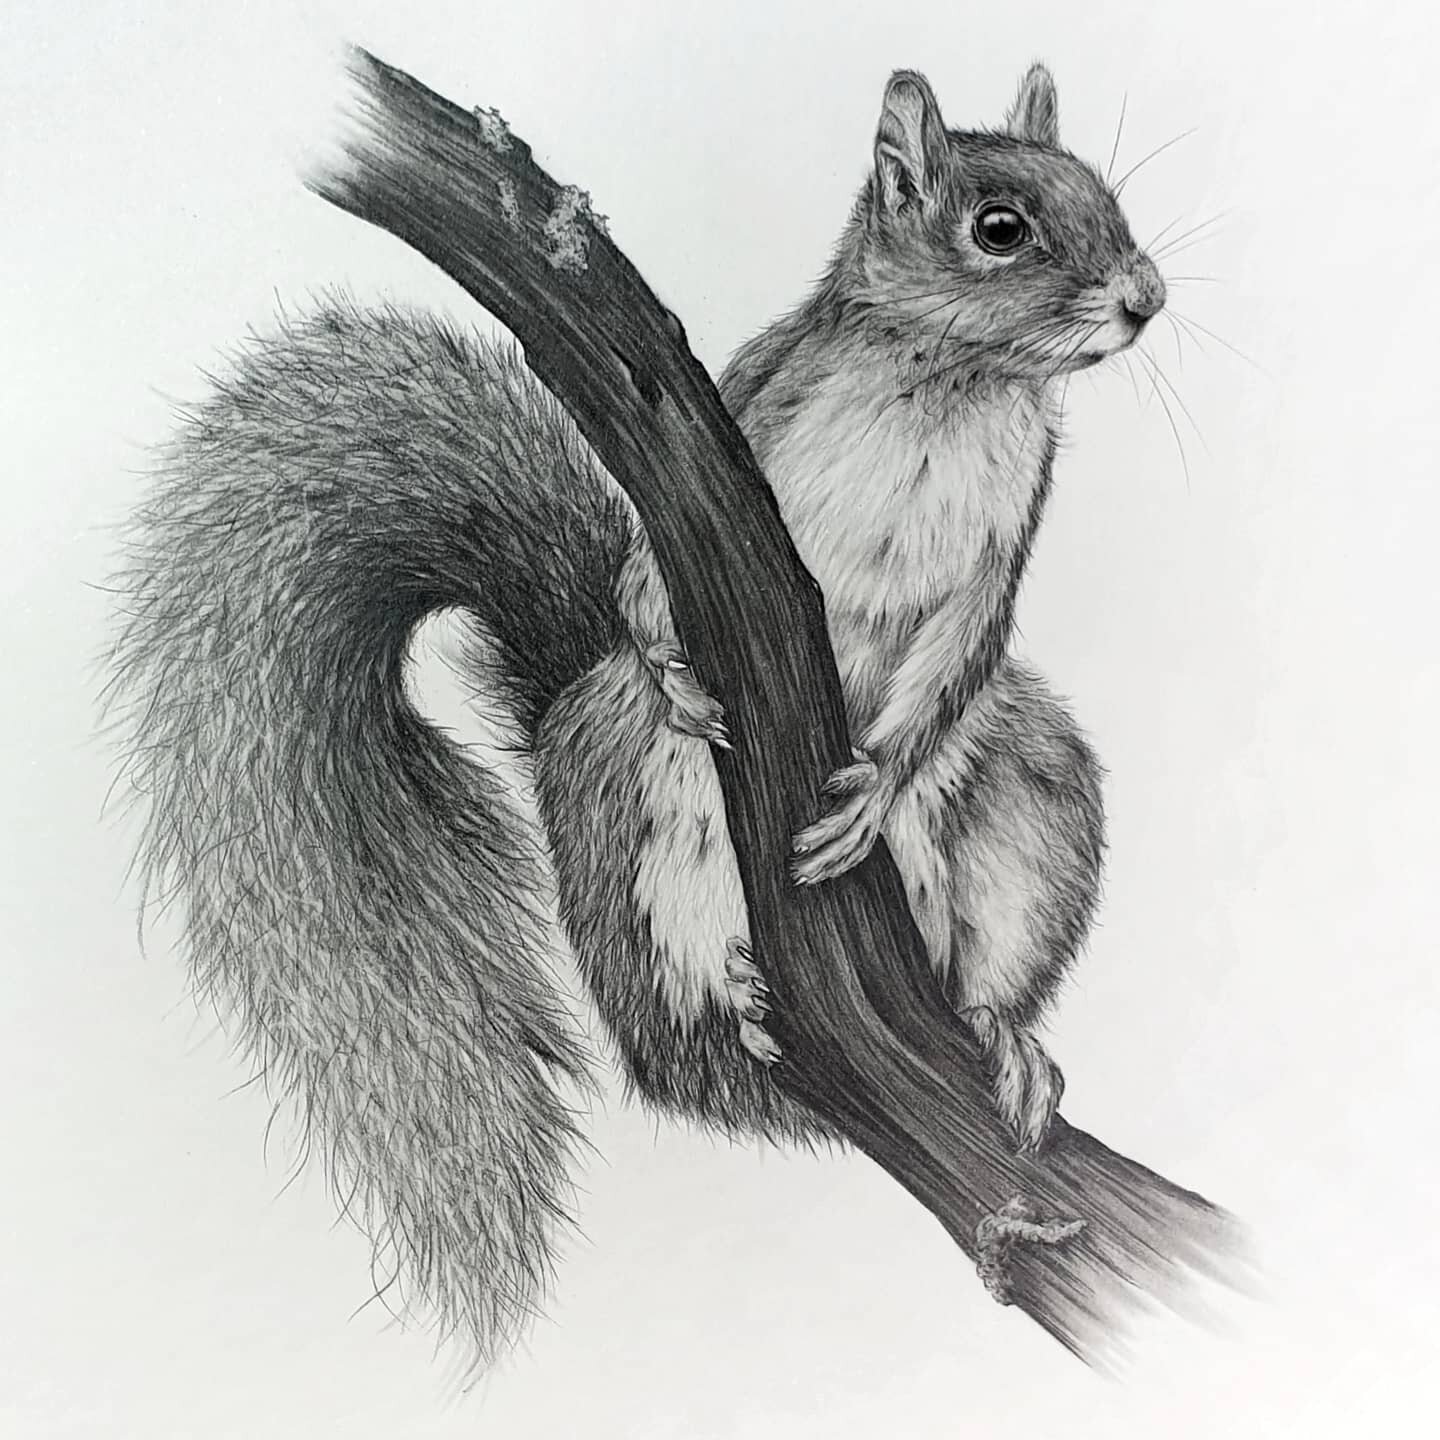 Squirrel complete with a fluffy tail 🐿 

Finishing something feels like such a rarity to me these days, but here's proof that is does happen!! 😂😅 

#art #artist #artwork #sketch #drawing #originalart #realism #art_realism #sharingart #artofplanet 